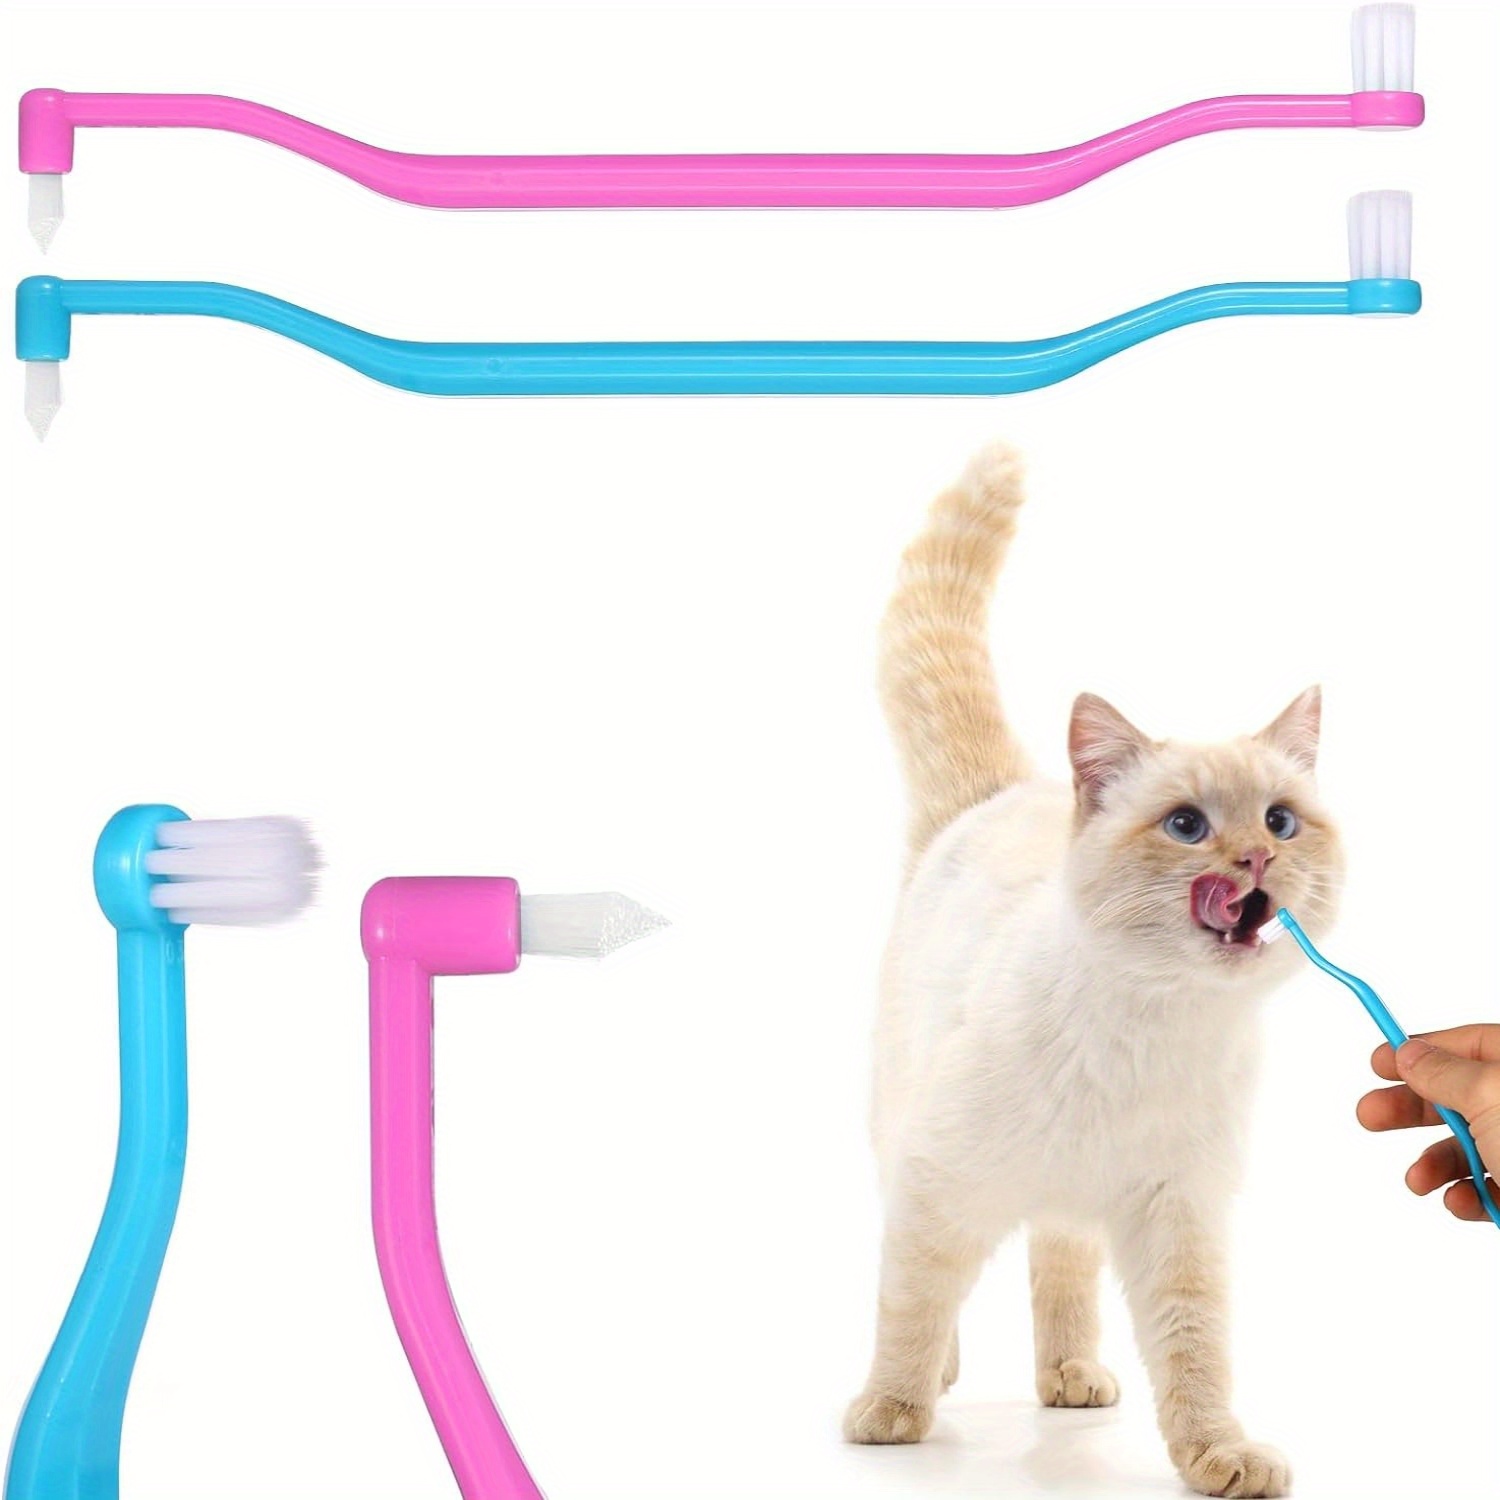 

2pcs Double-sided Cat Toothbrush, Kitten Toothbrush, Cat Tooth Cleaning Brush, Cat Tooth Care Supplies With Micro-brush Head And Curved Handle To Reduce Plaque Formation